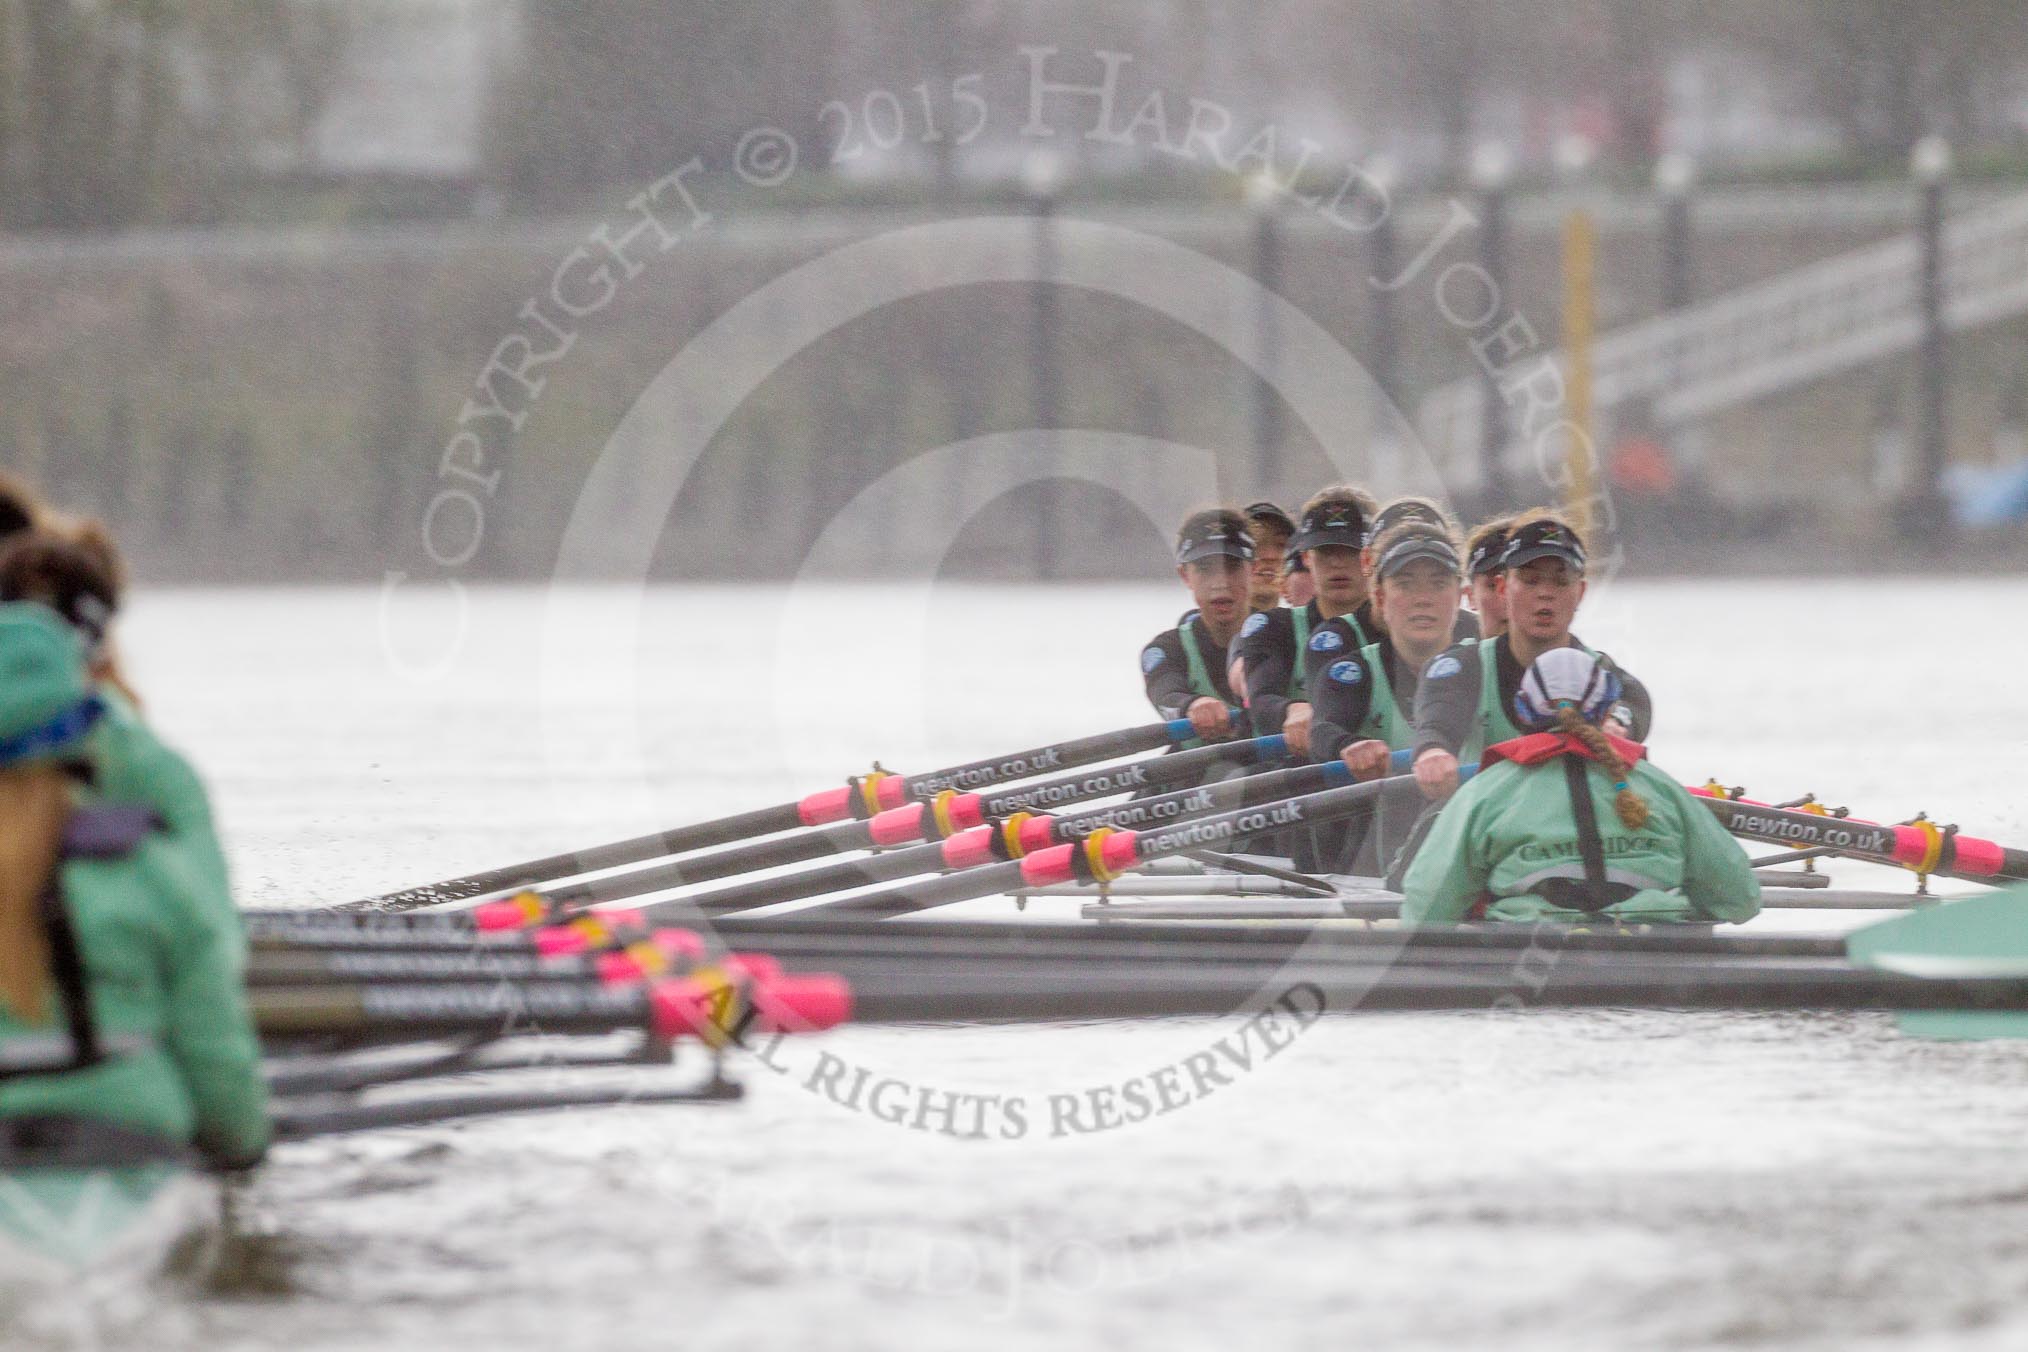 The Boat Race season 2016 - Women's Boat Race Trial Eights (CUWBC, Cambridge): "Twickenham" in the lead at Fulham Reach.
River Thames between Putney Bridge and Mortlake,
London SW15,

United Kingdom,
on 10 December 2015 at 11:08, image #69